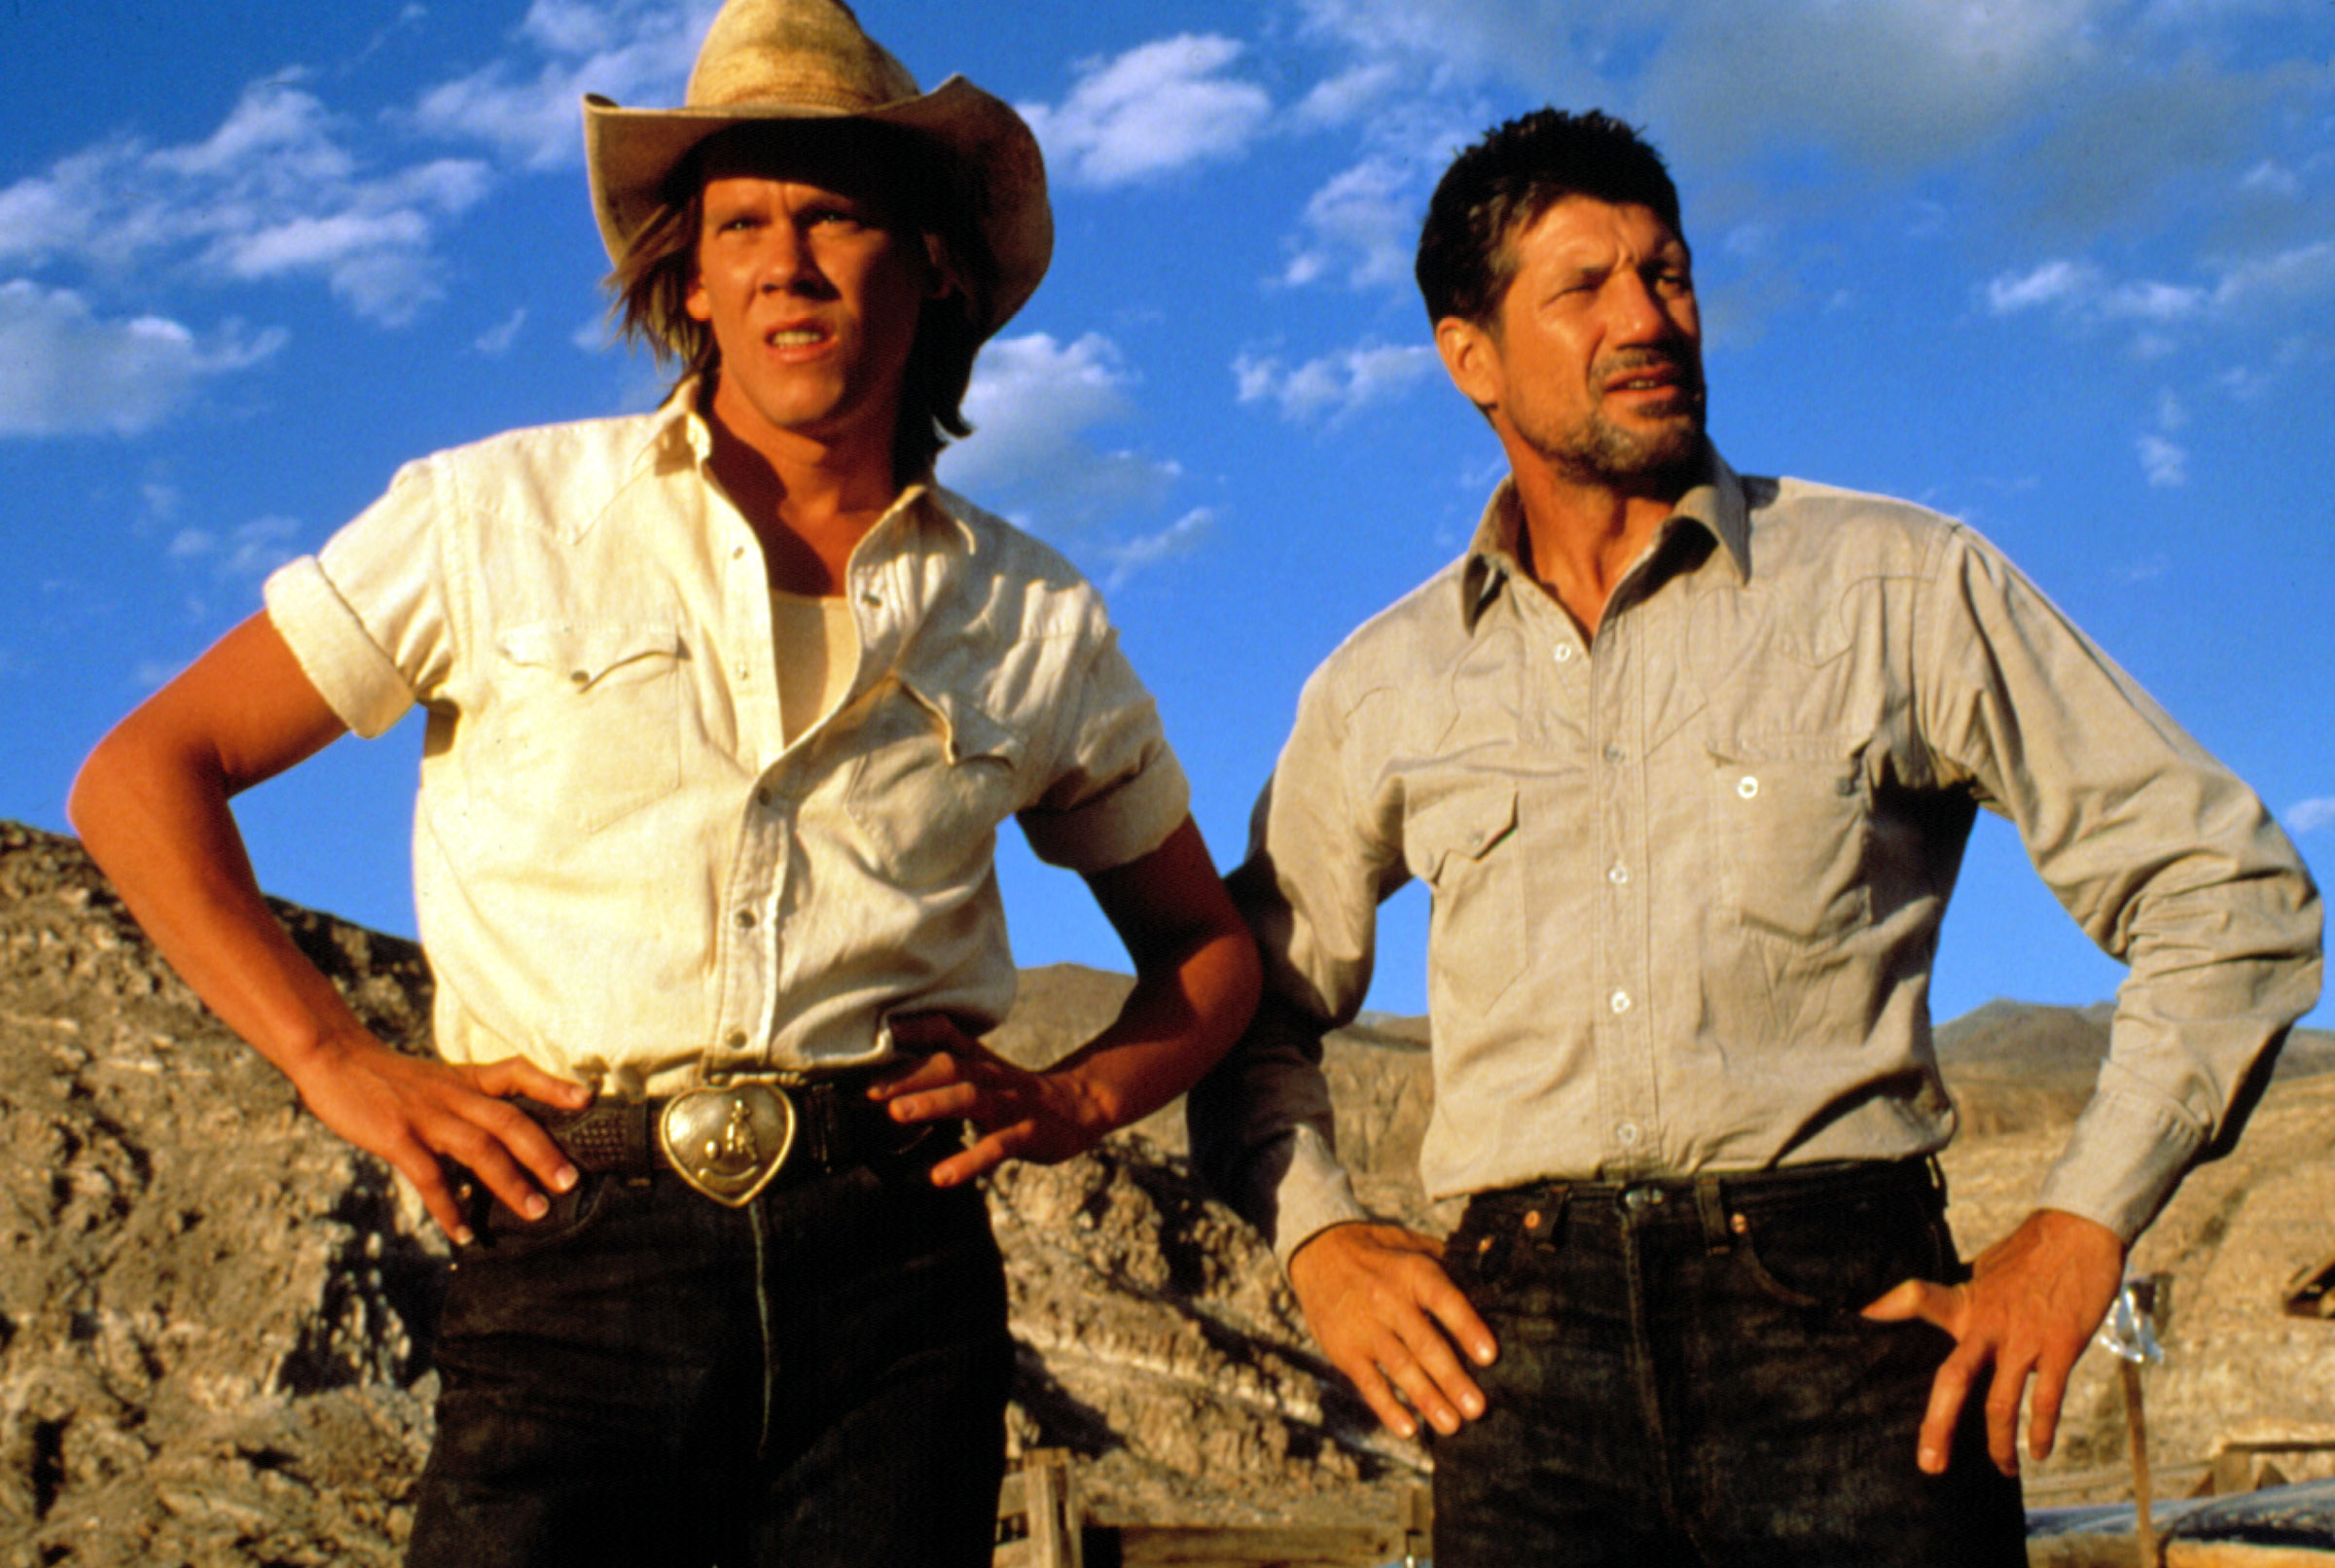 Two actors from a movie pose, one in a cowboy hat and belt buckle, the other in a casual shirt, both looking afar